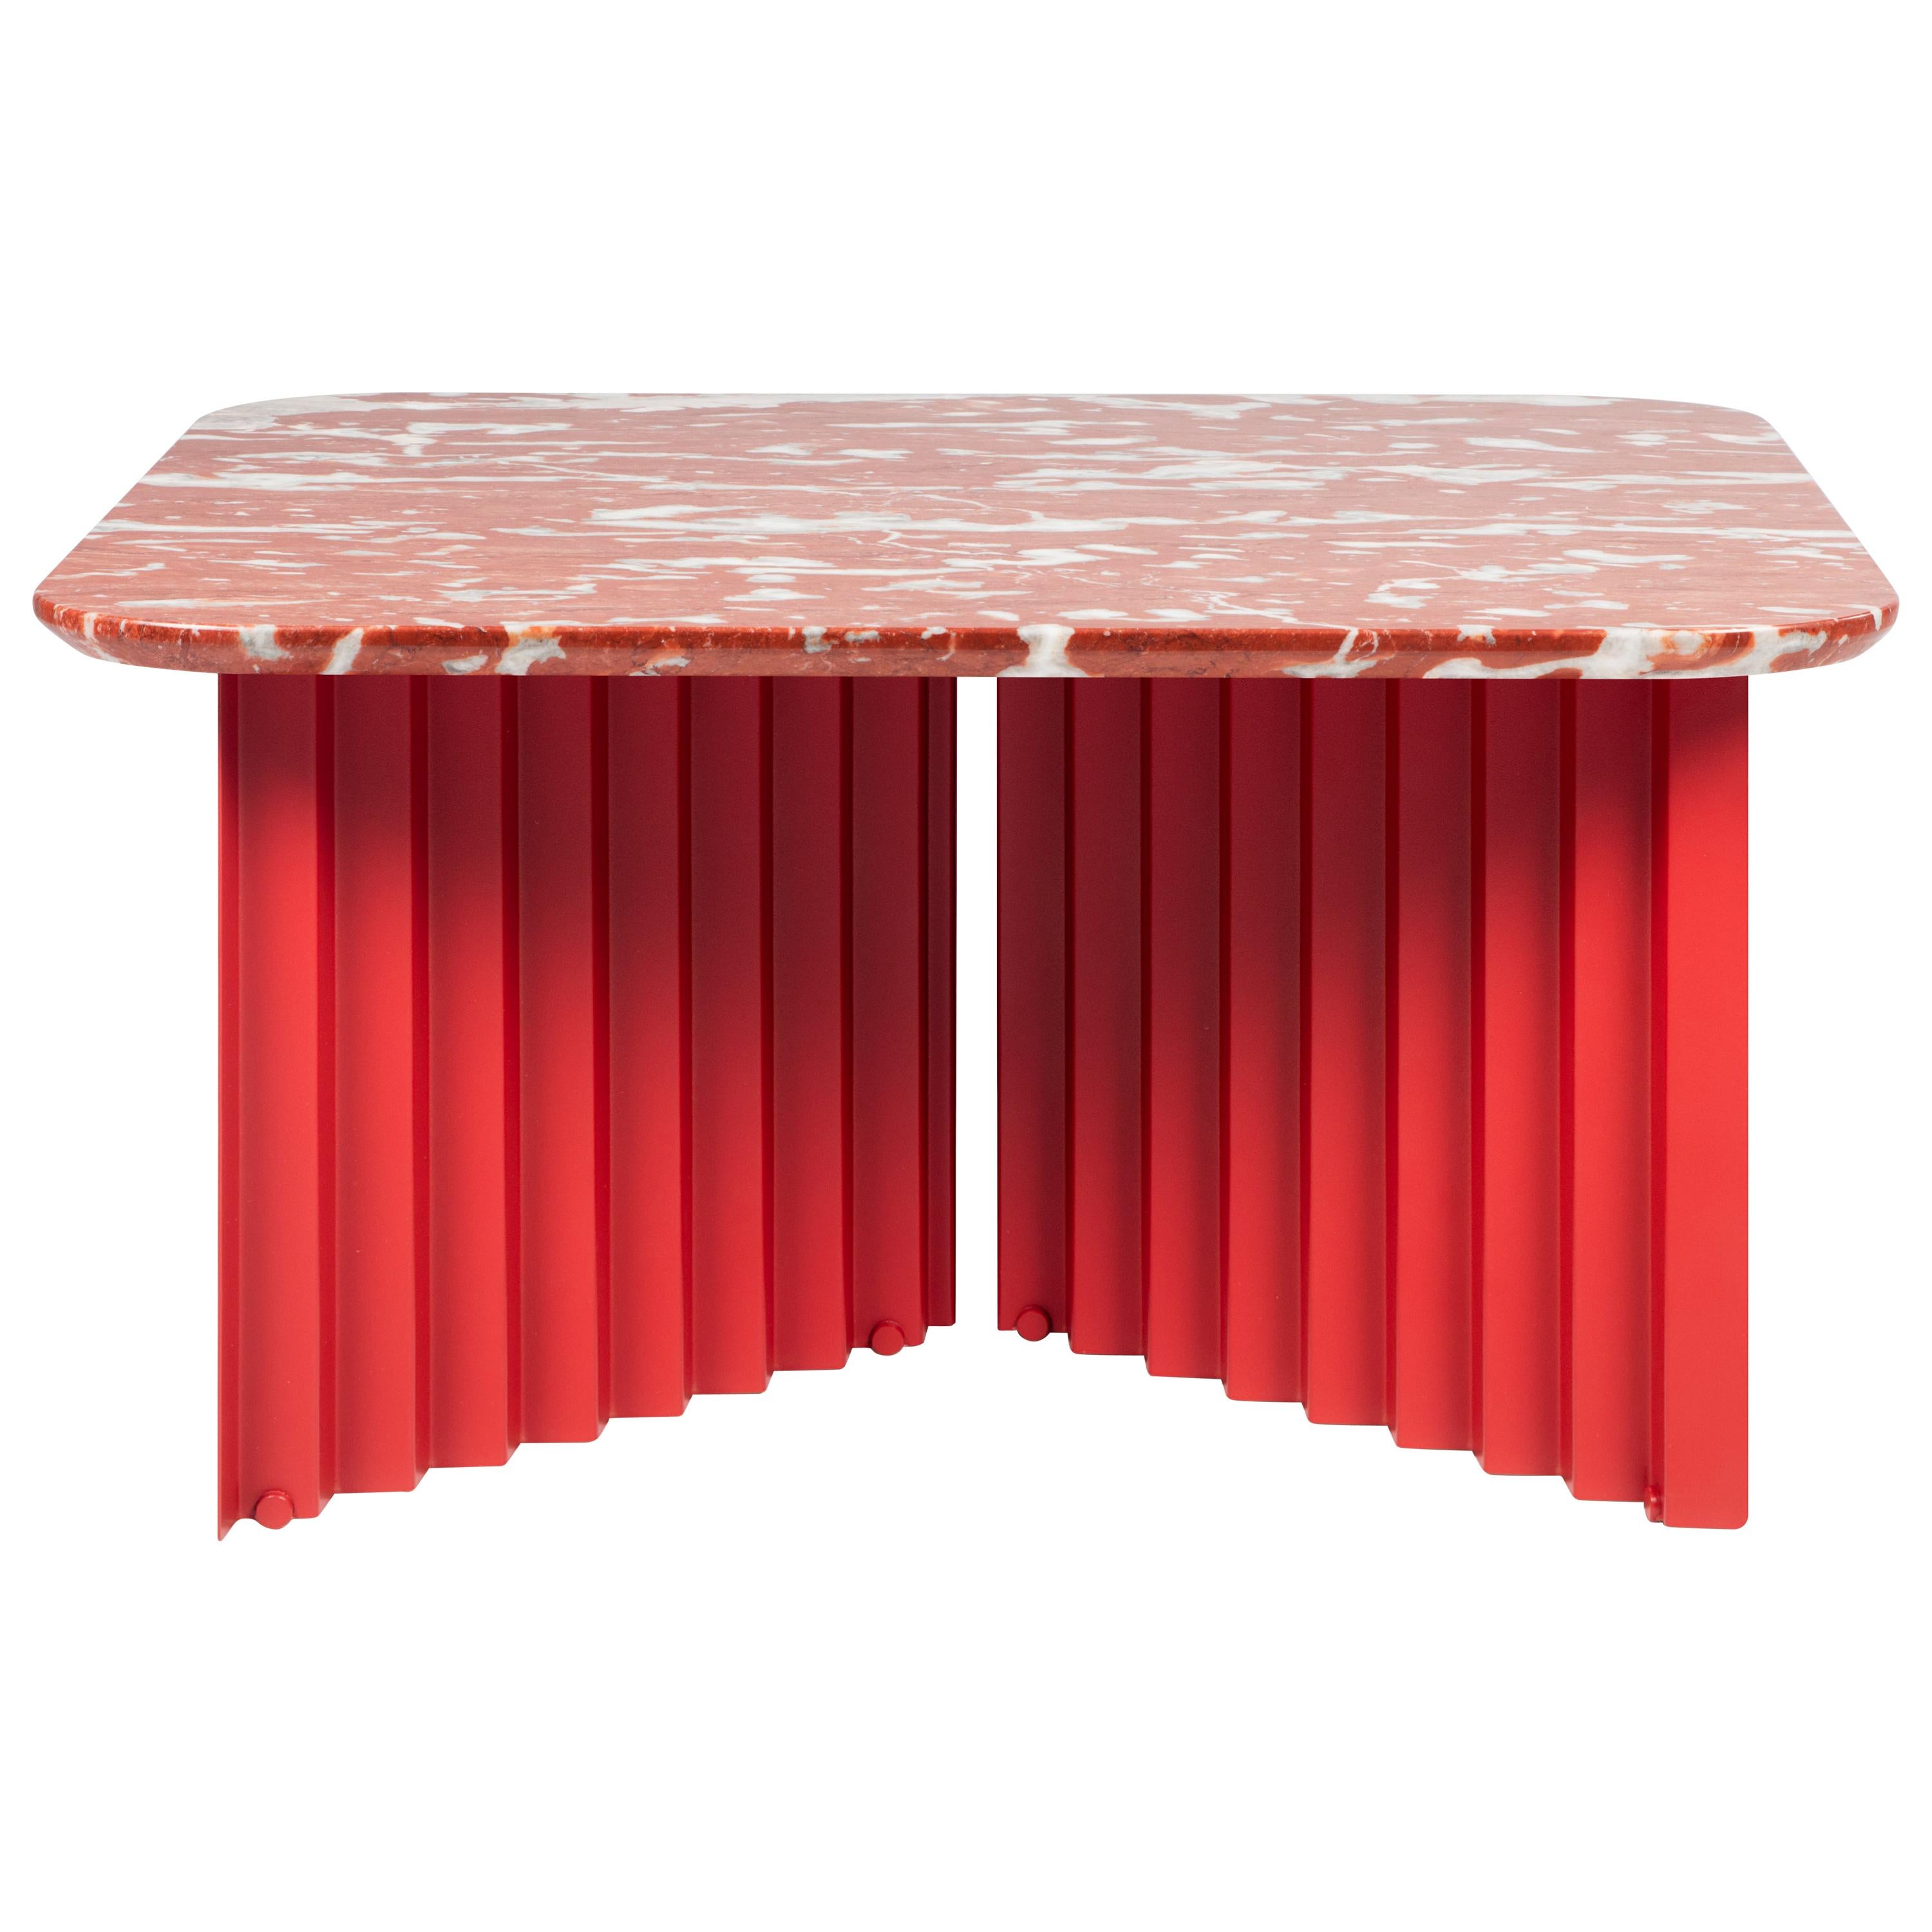 RS Barcelona Plec Medium Table in Red Marble by A.P.O.